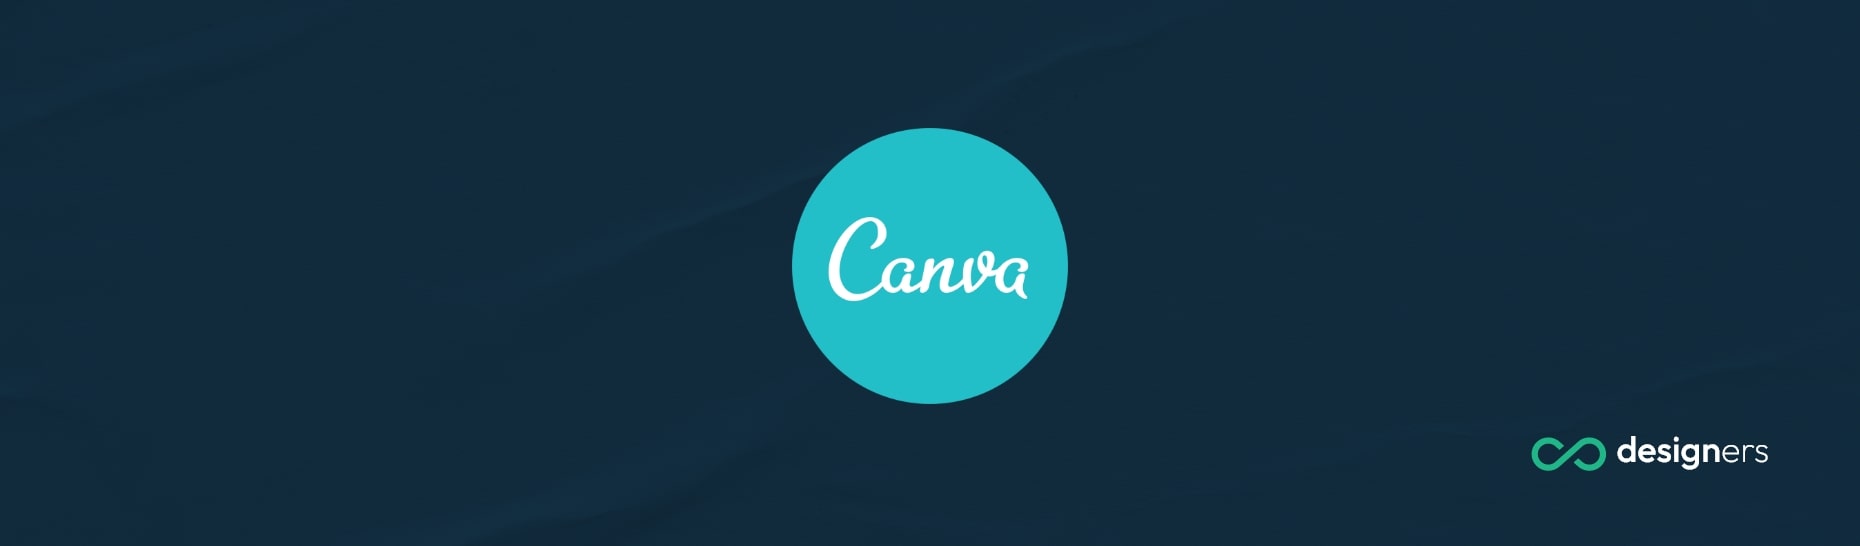 What Can I Make With Canva?